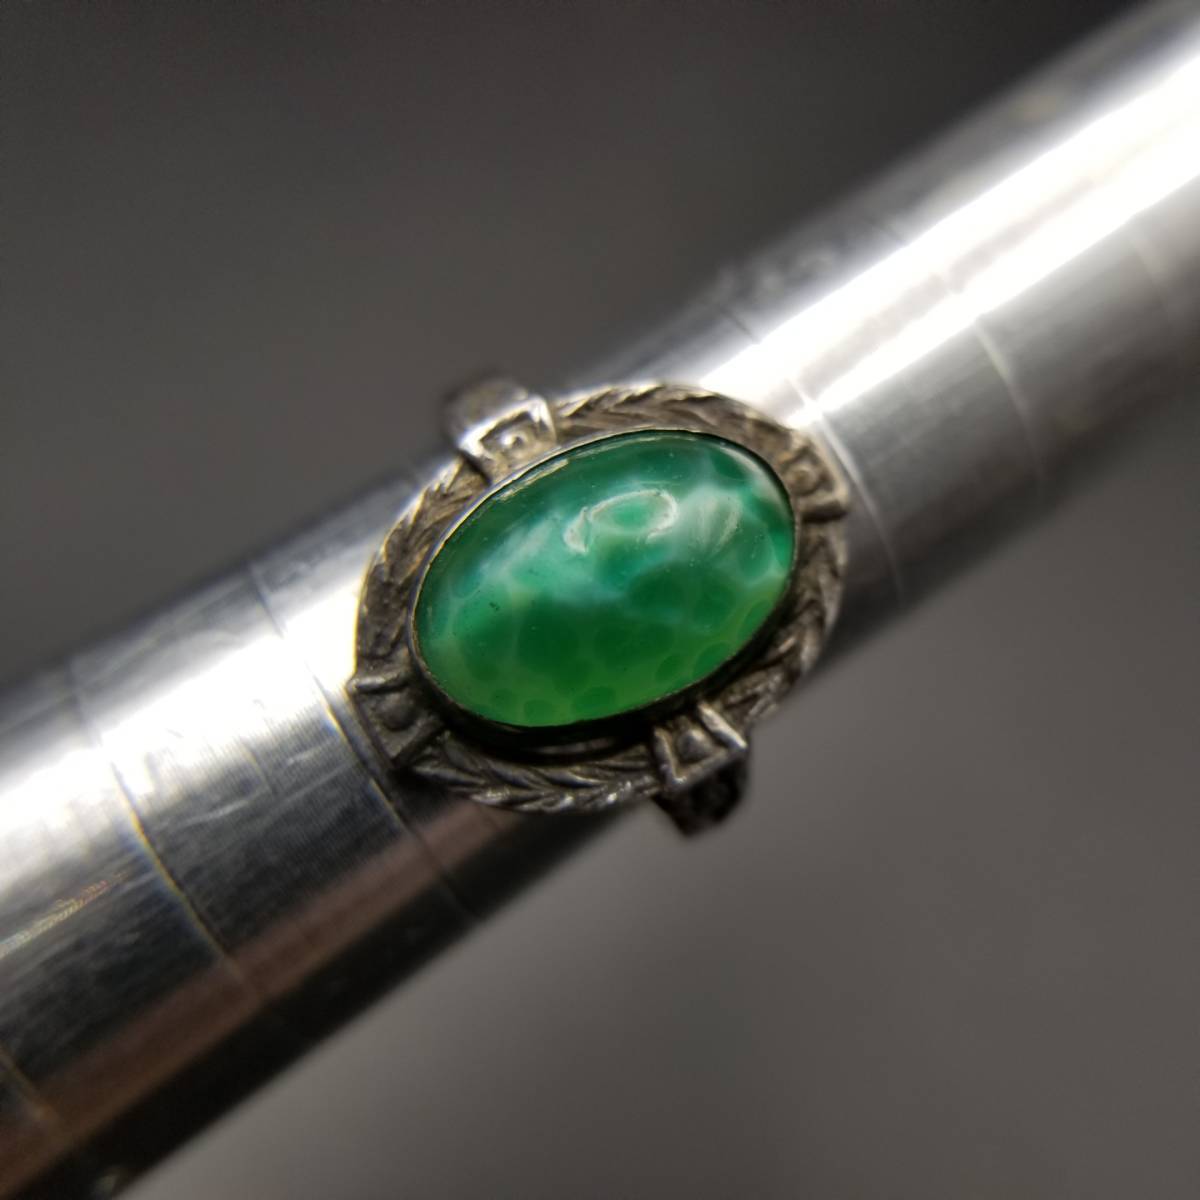  green marble glass kaboshon flower sculpture 925 silver Vintage ring 2.5g silver ring oval knitting rim R9-E